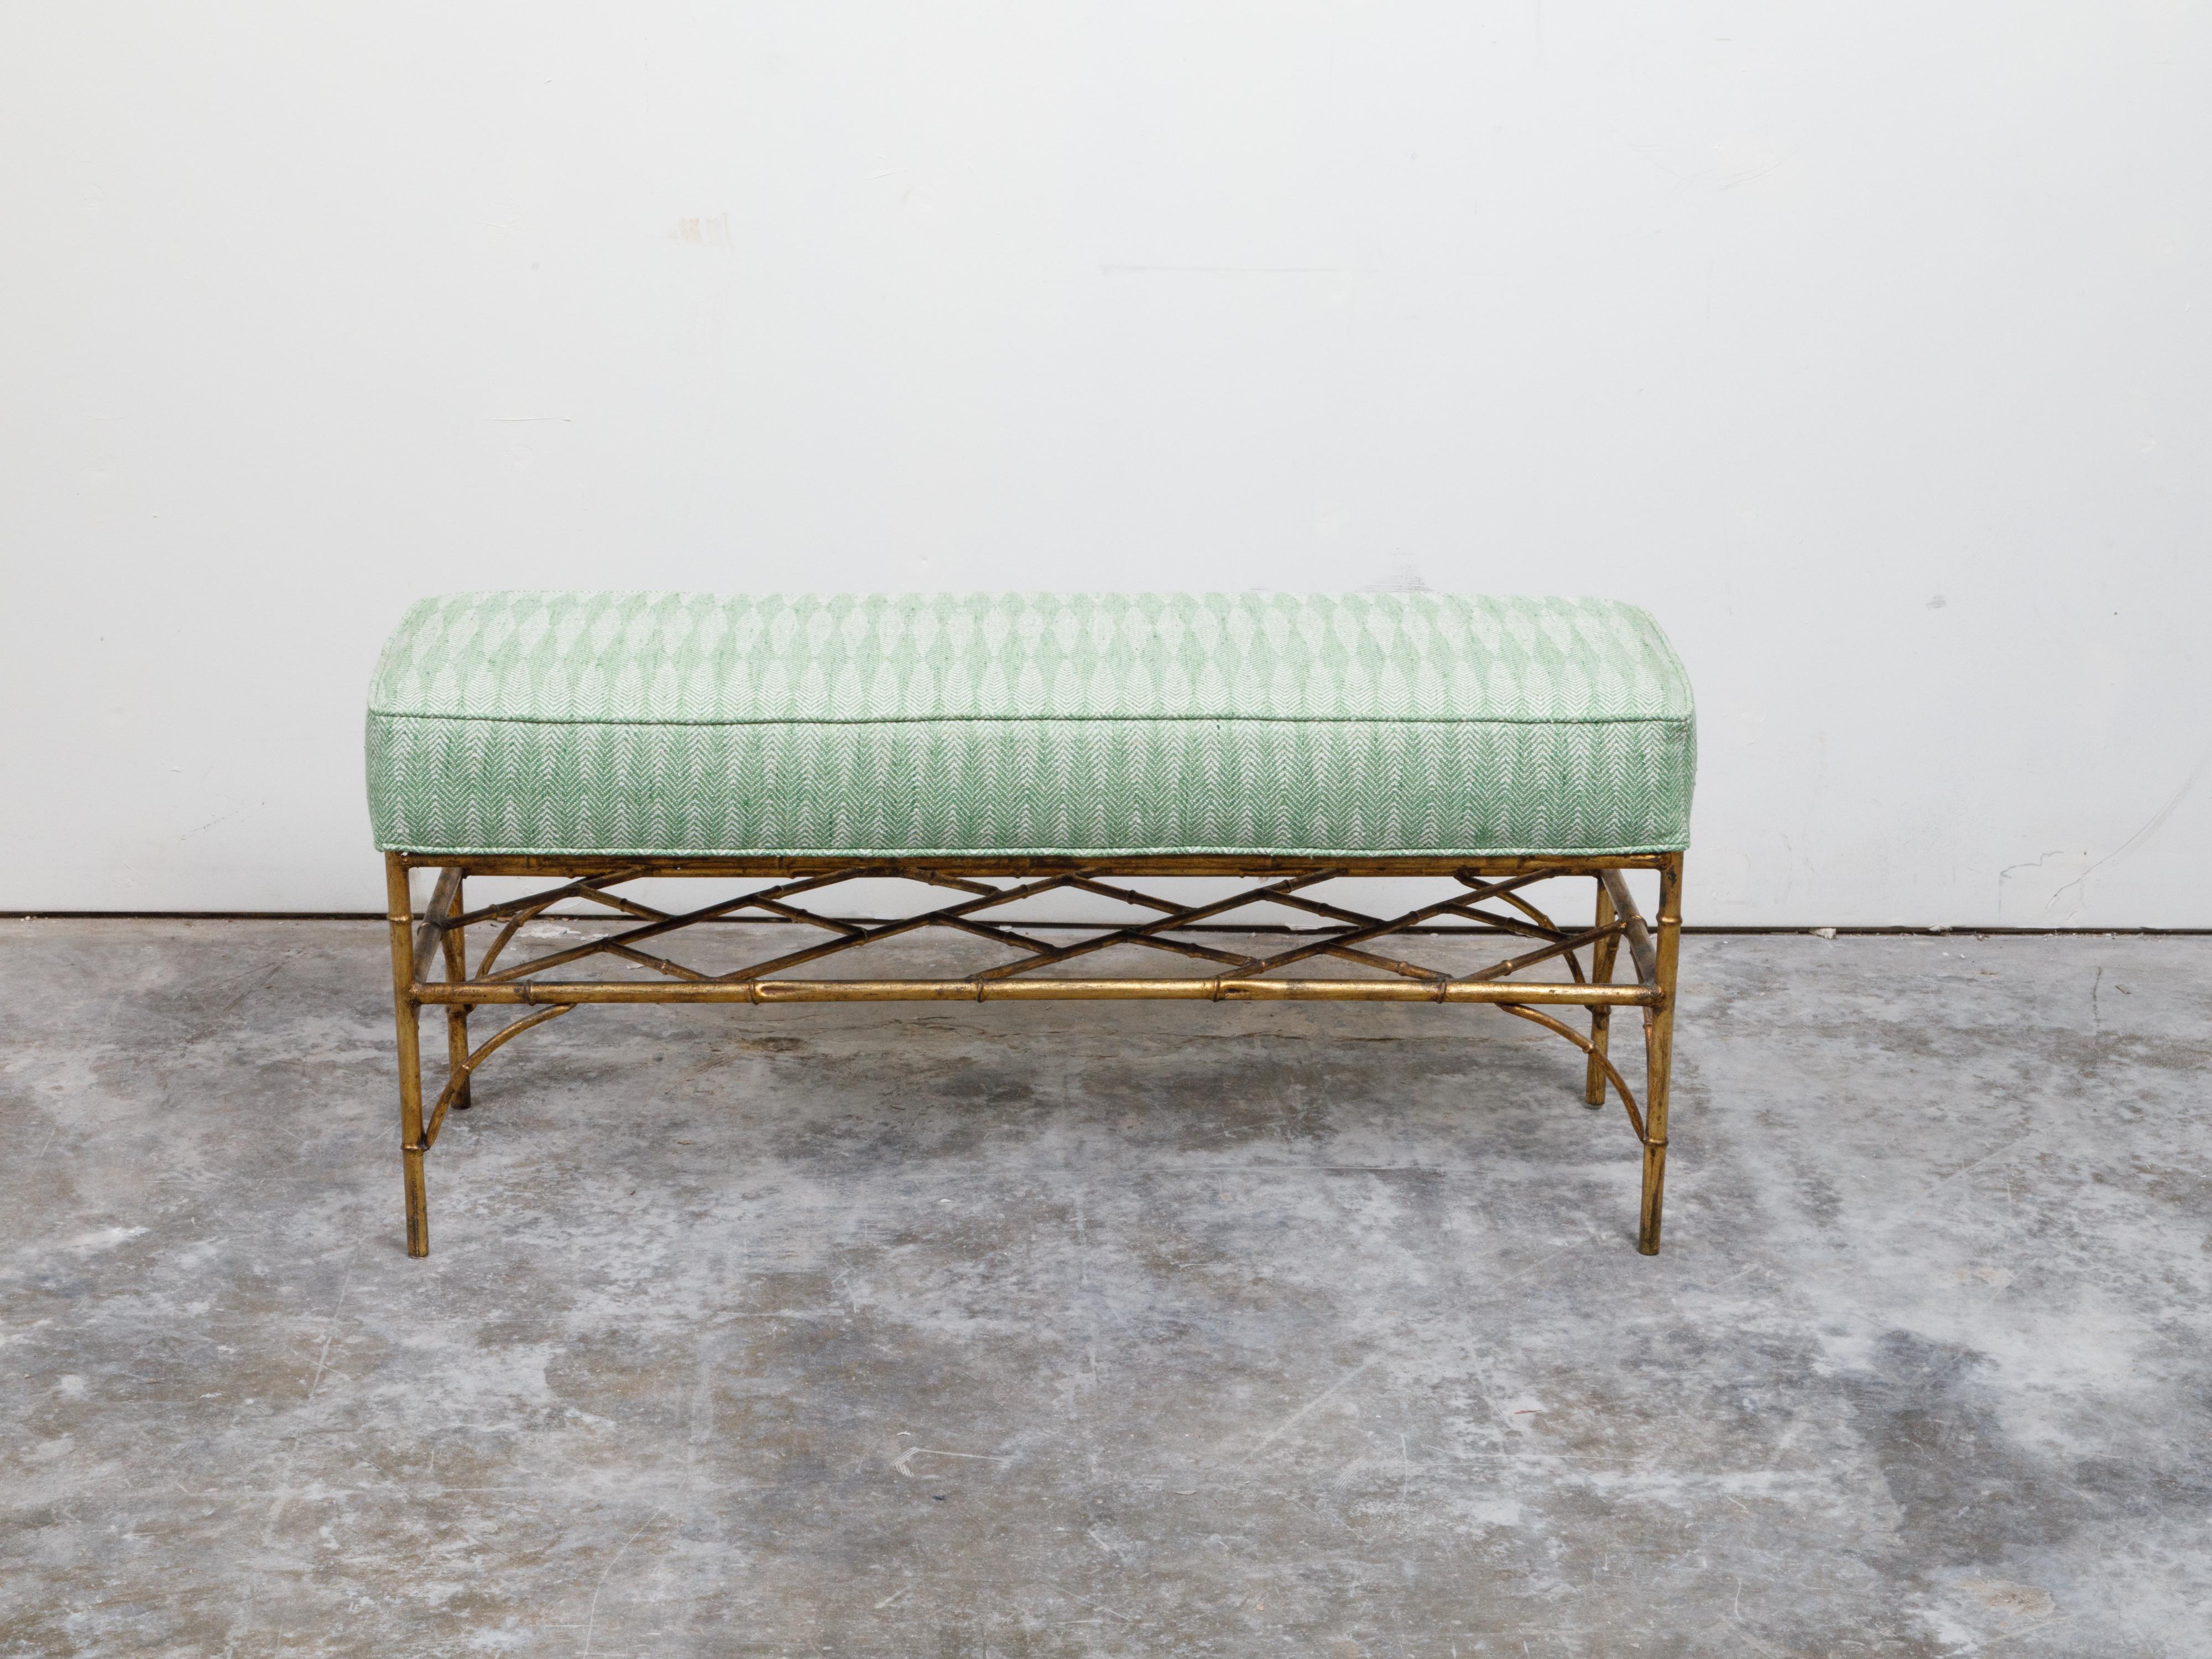 Italian Midcentury Gilt Metal Faux Bamboo Bench with Green Upholstered Seat For Sale 2